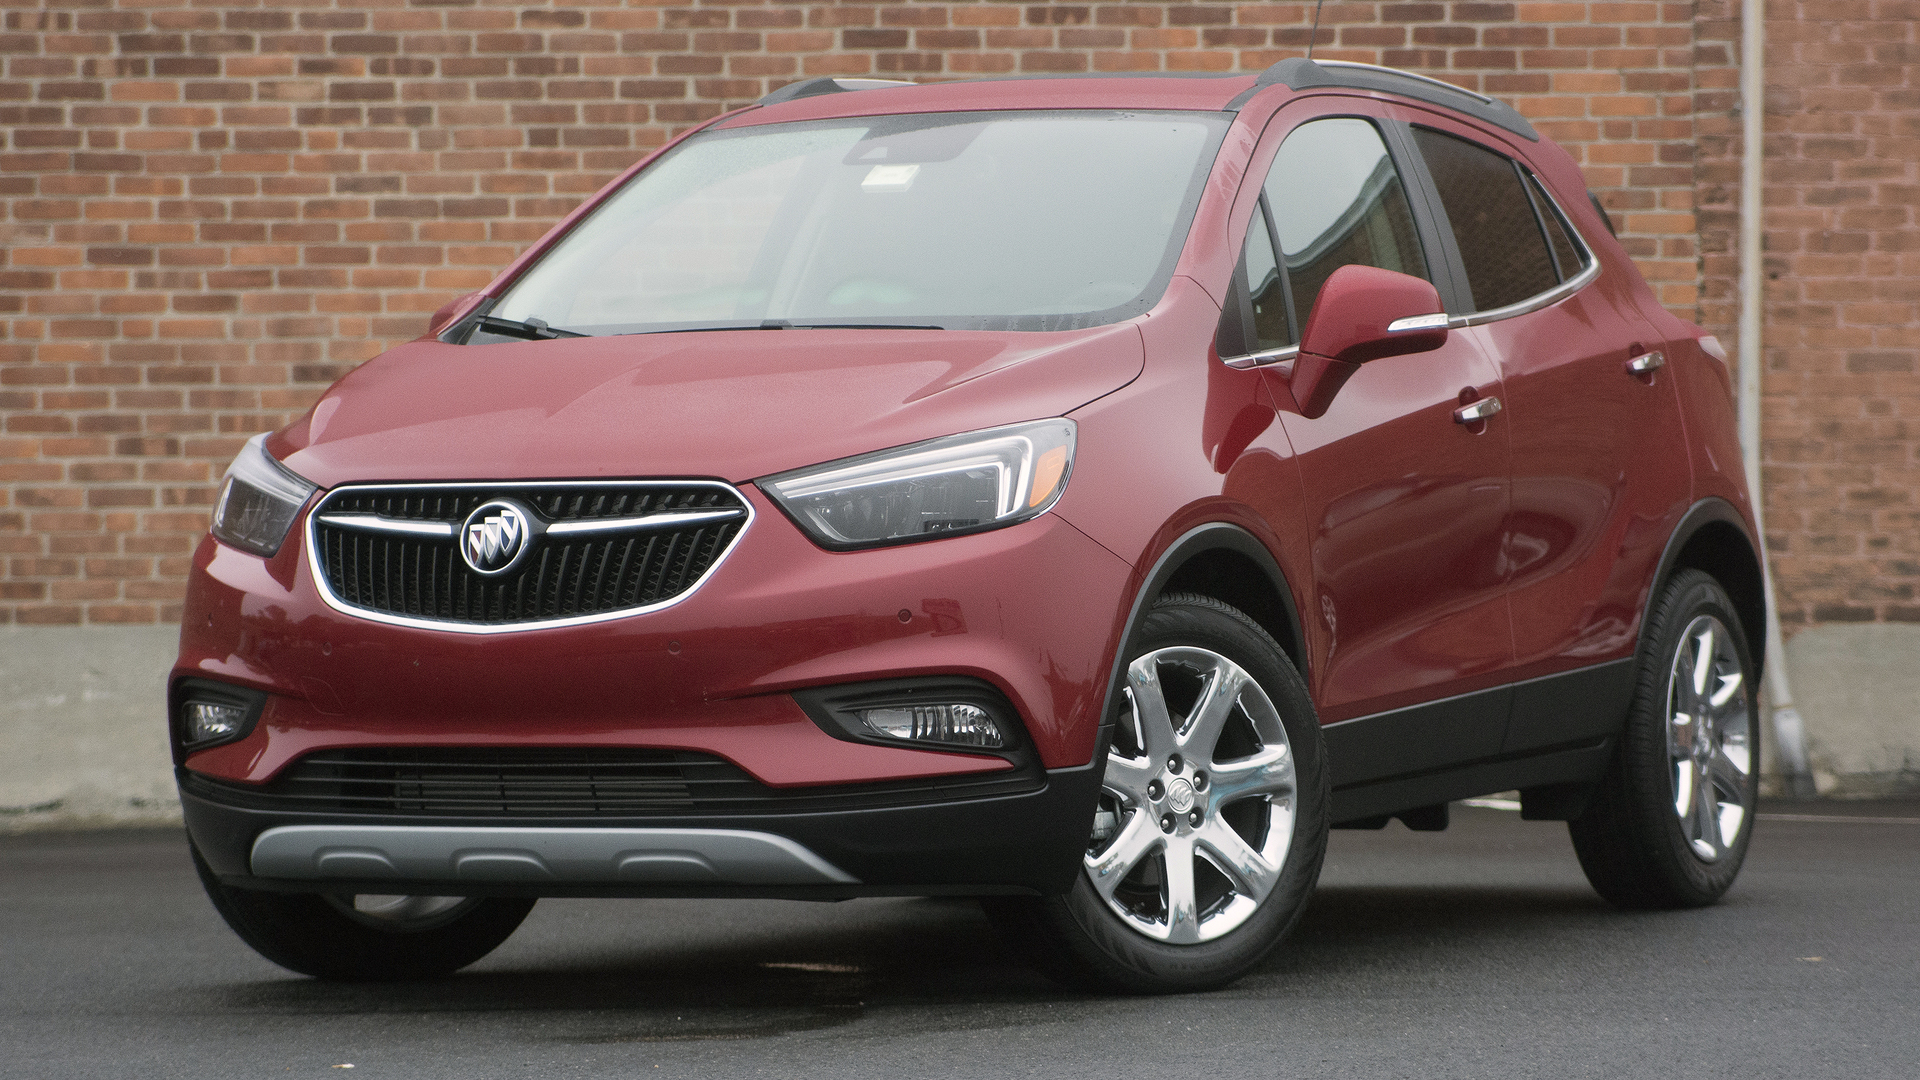 2019 Buick Encore Rebate Cuts Price By More Than $5,000